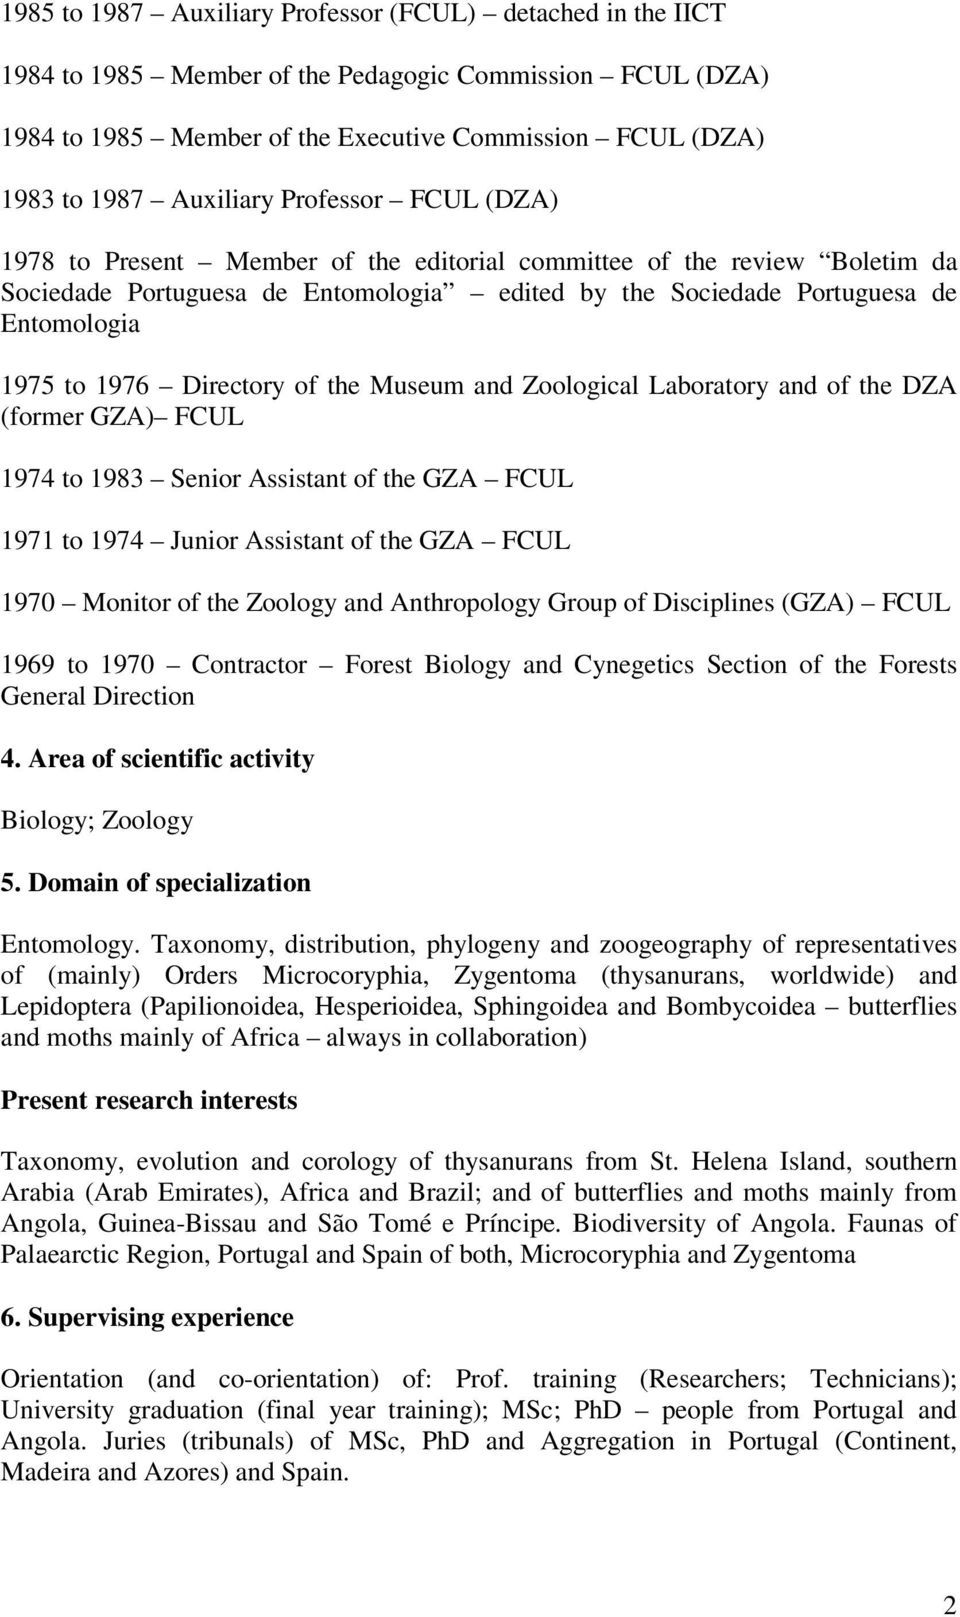 1976 Directory of the Museum and Zoological Laboratory and of the DZA (former GZA) FCUL 1974 to 1983 Senior Assistant of the GZA FCUL 1971 to 1974 Junior Assistant of the GZA FCUL 1970 Monitor of the